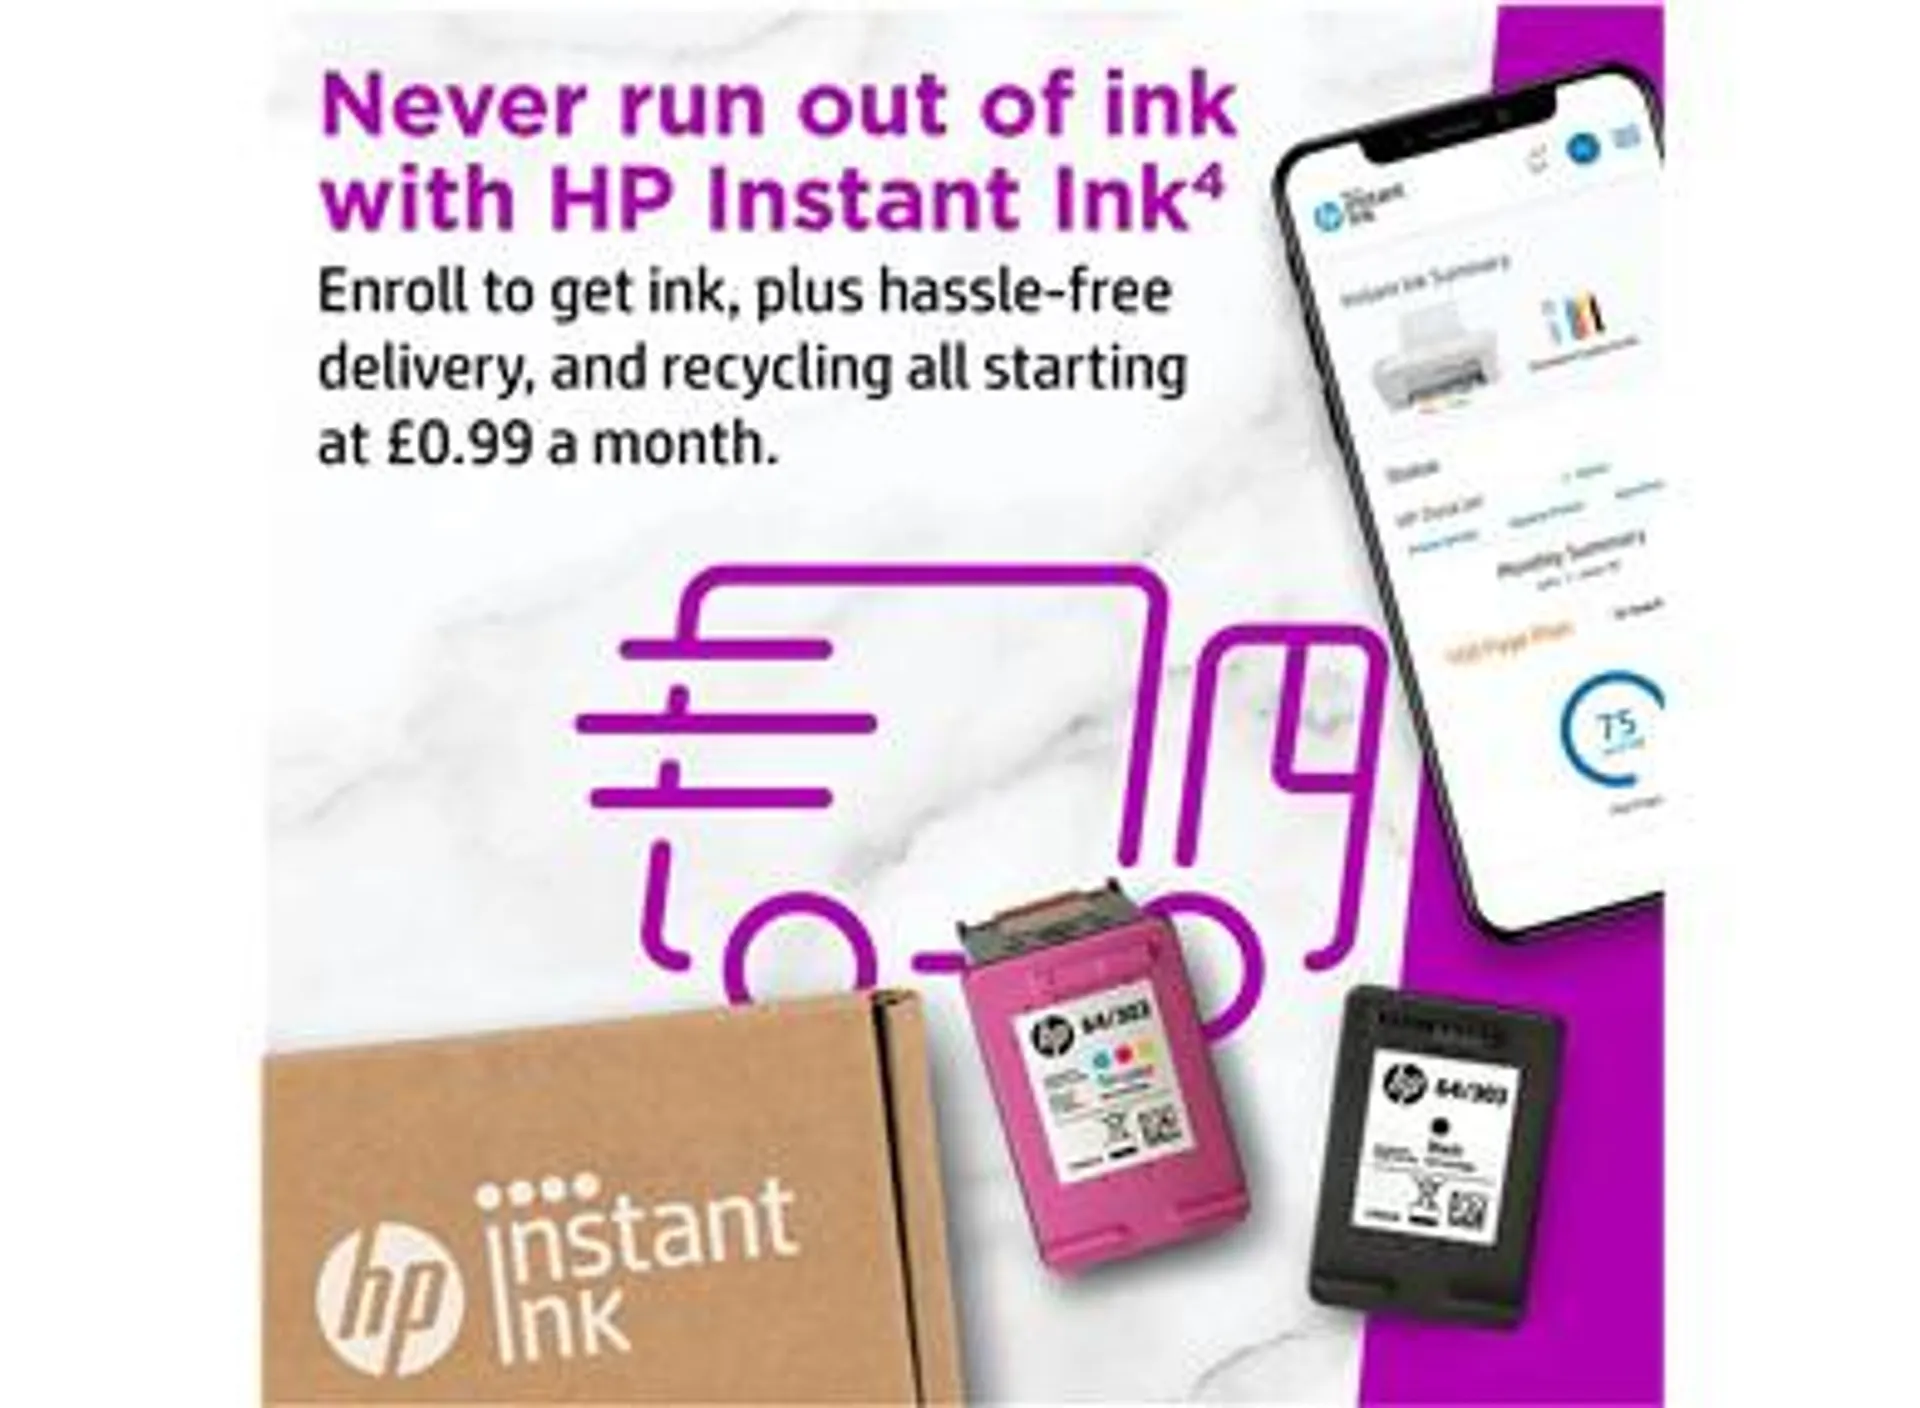 HP ENVY 6020e HP+ enabled All-in-One Wireless Colour Printer with 6 months Instant Ink